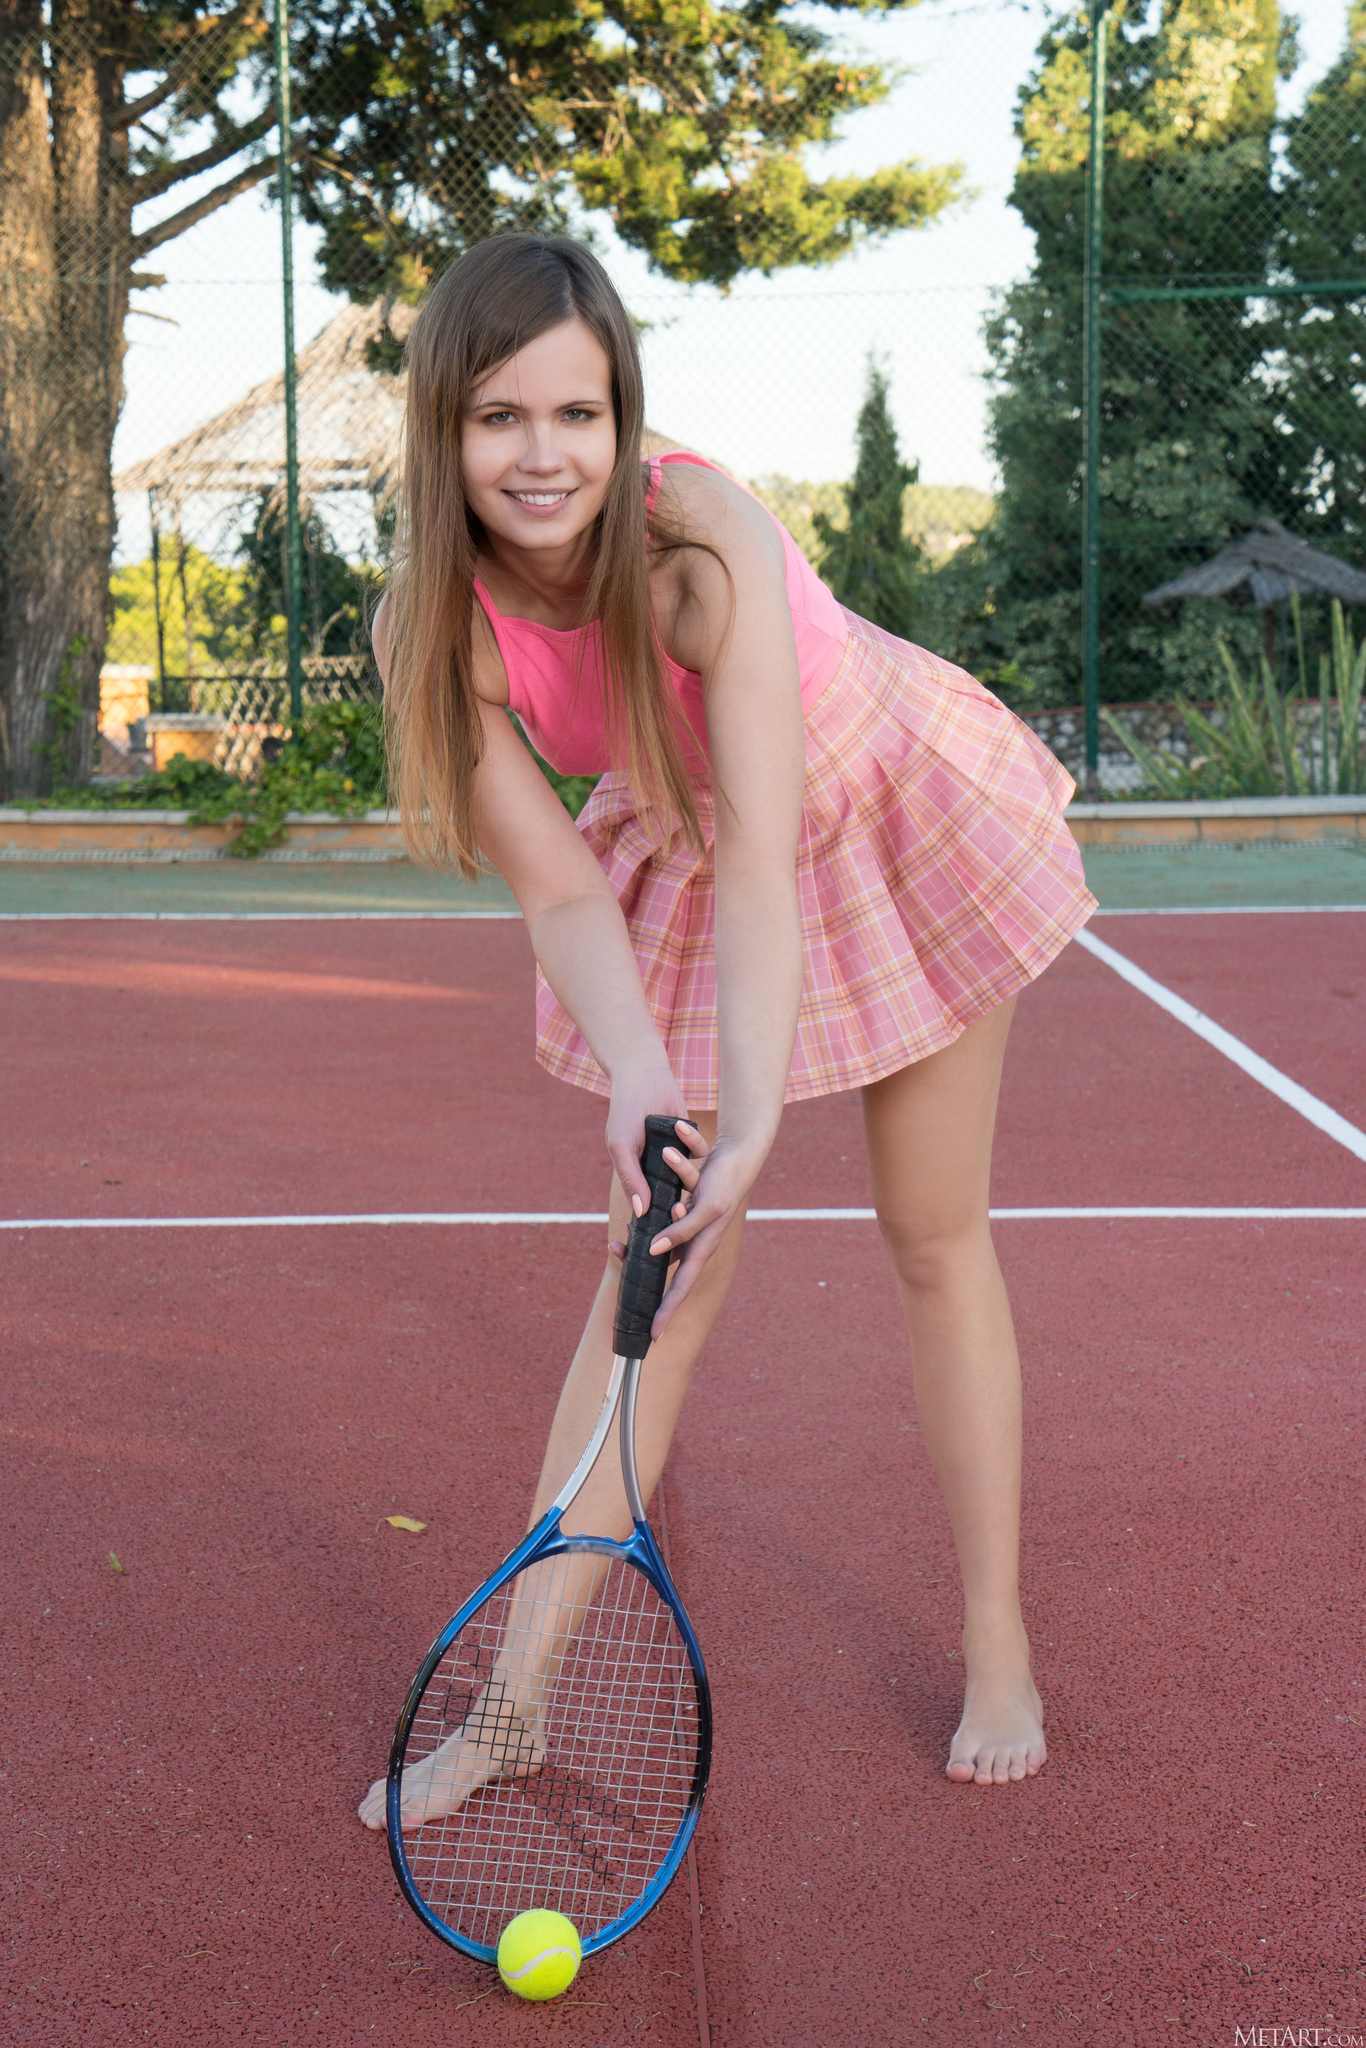 Tennis Teen Jennifer naked on the court - 0954 Porn picture